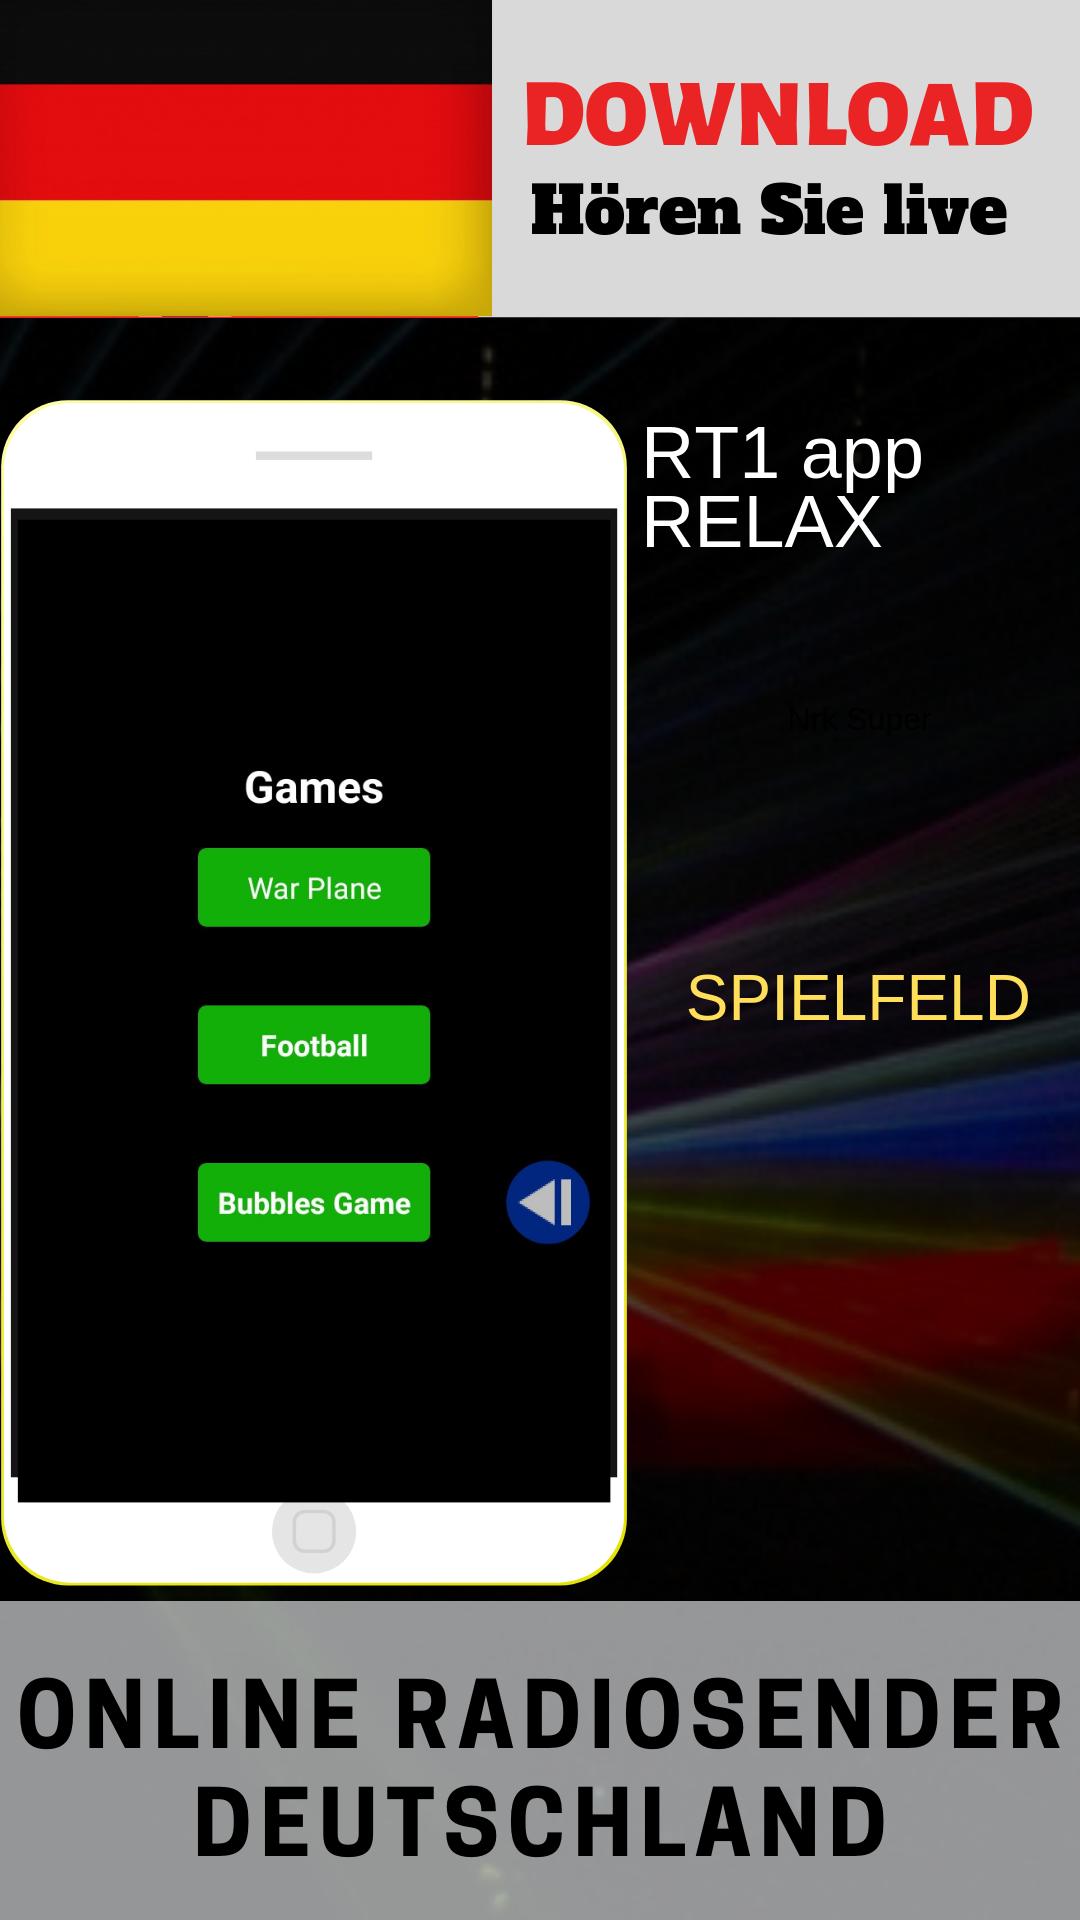 RT1 app RELAX for Android - APK Download